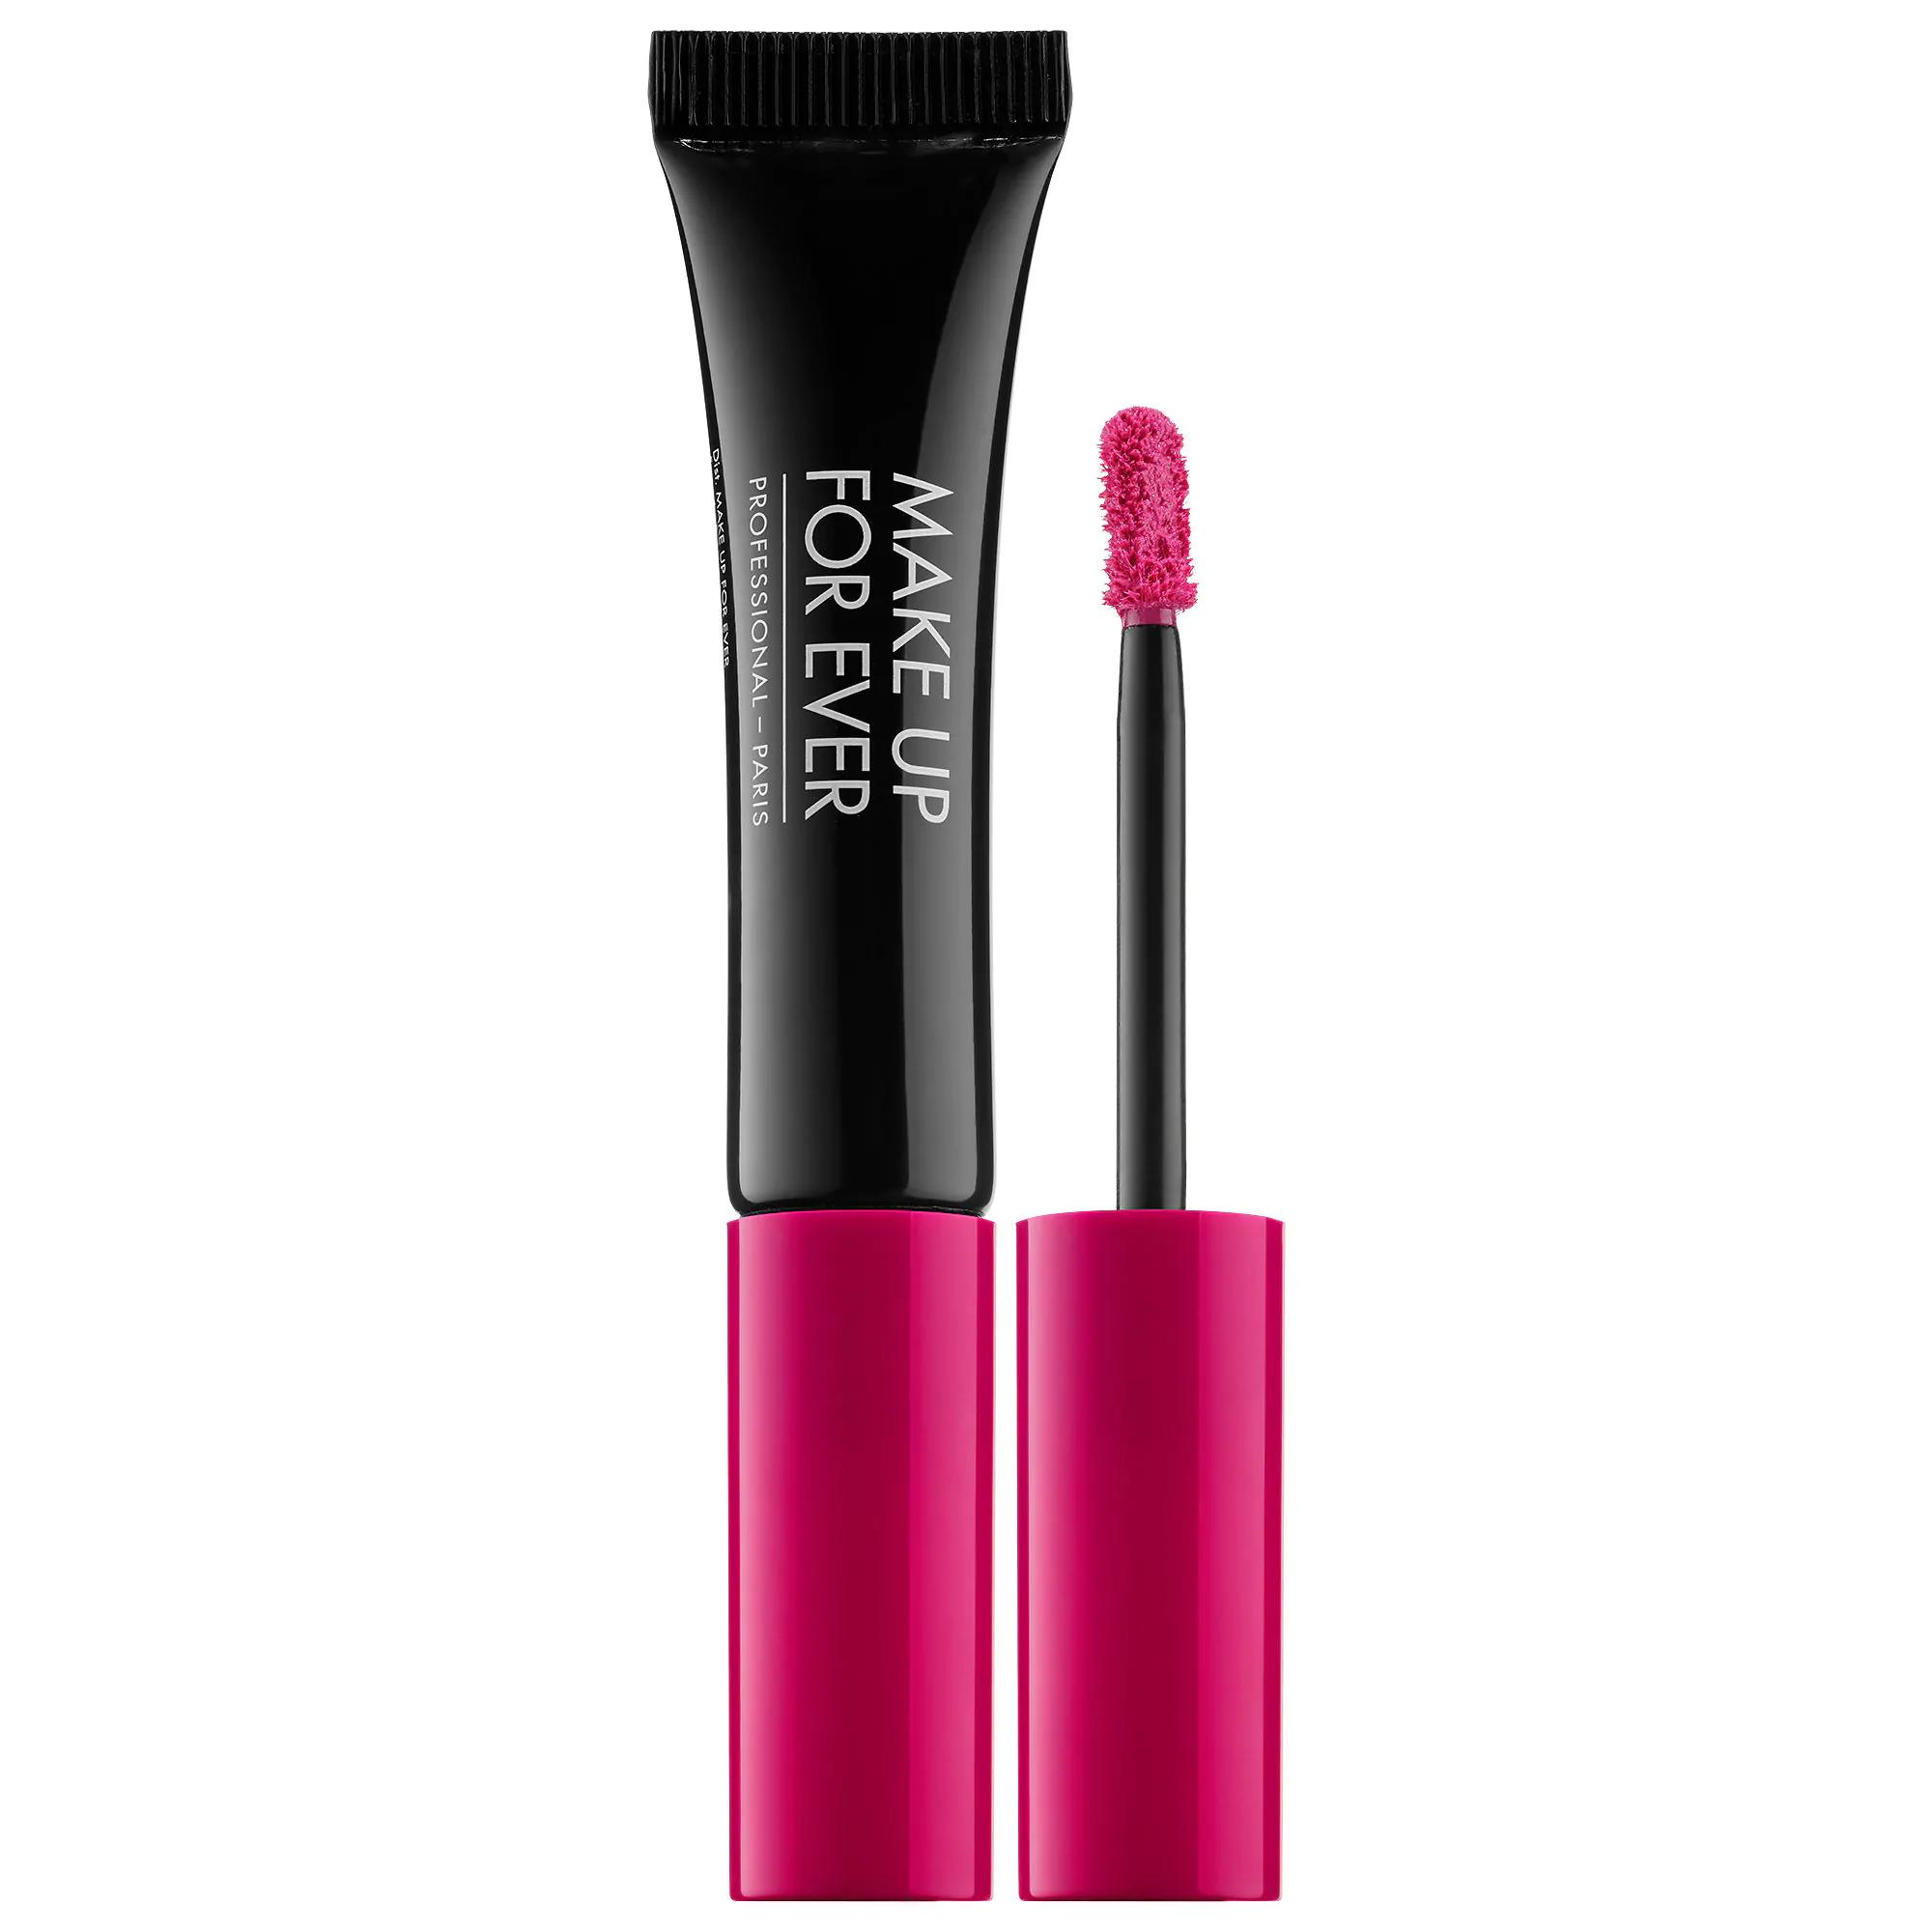 Makeup Forever Artist Acrylip Liquid Stain Electric Fuchsia 922